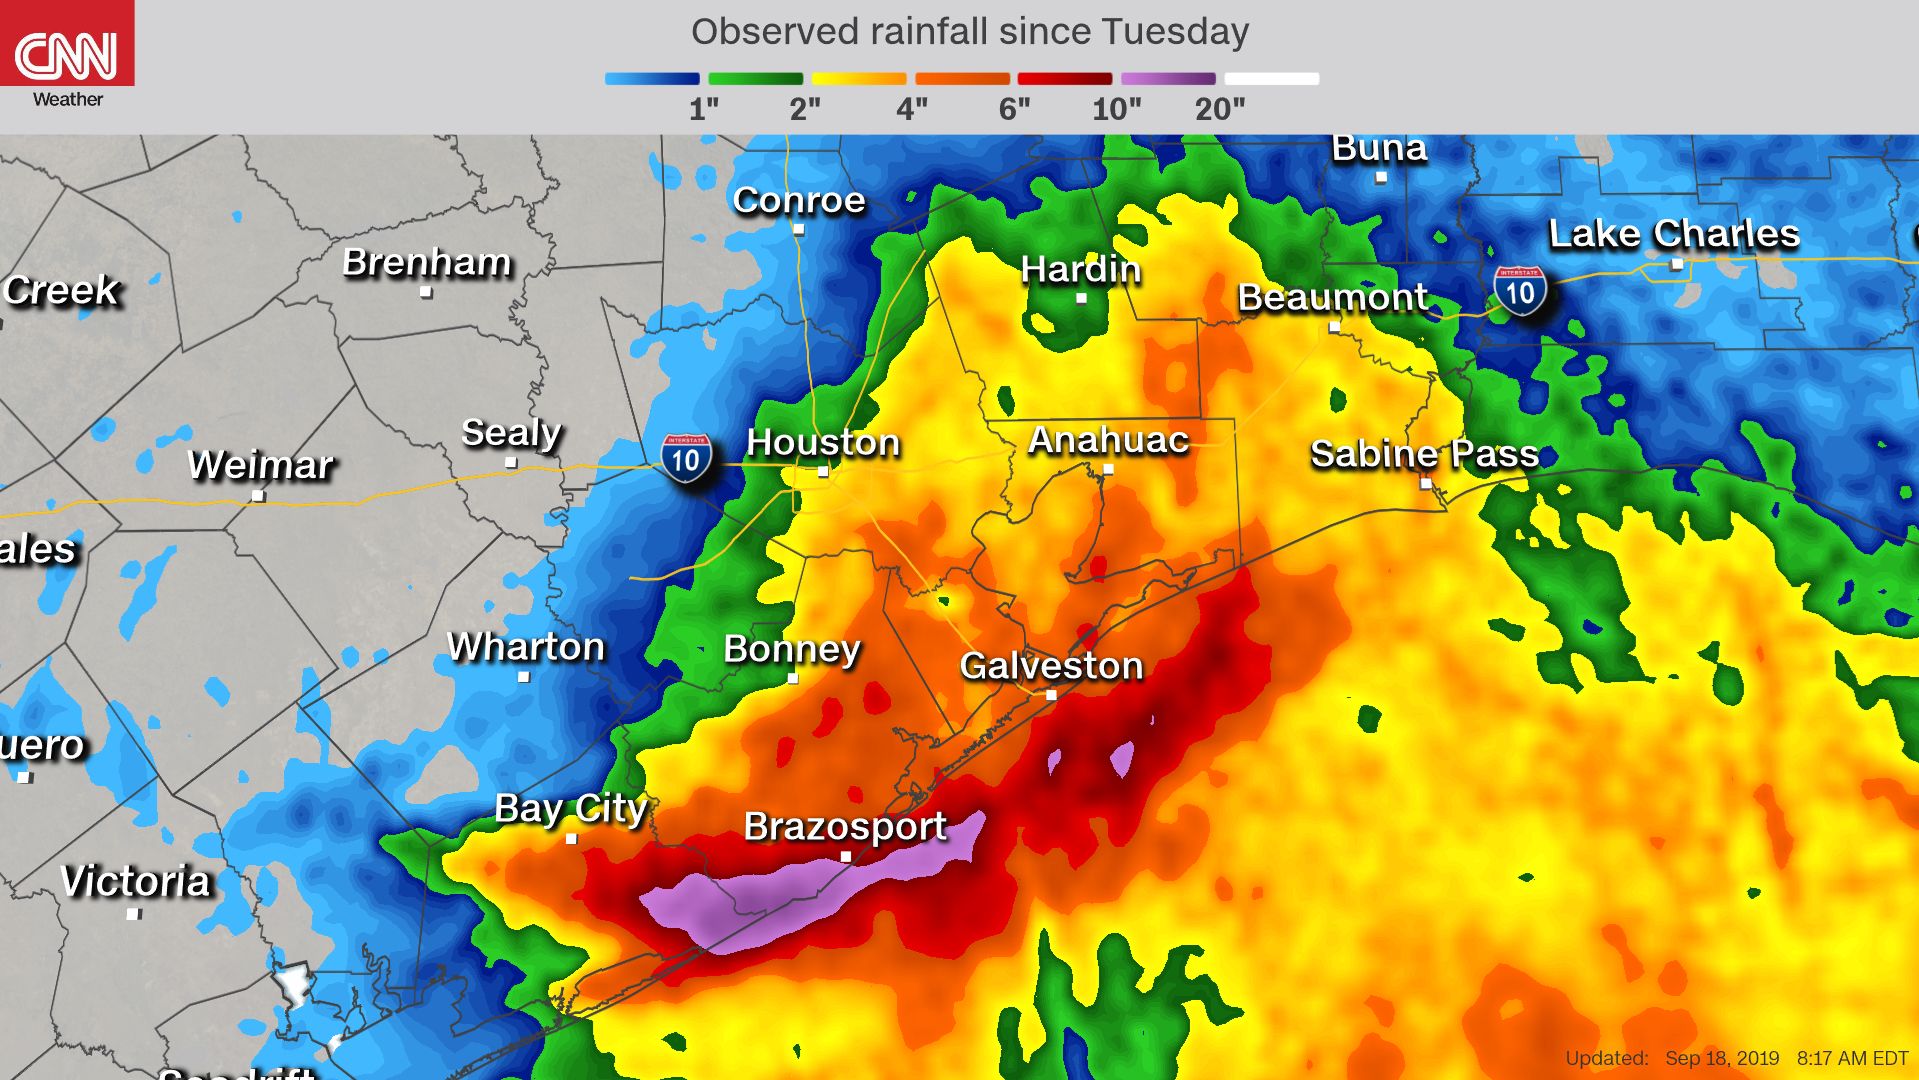 Here's how much rain fell between Tuesday morning and early Wednesday morning.